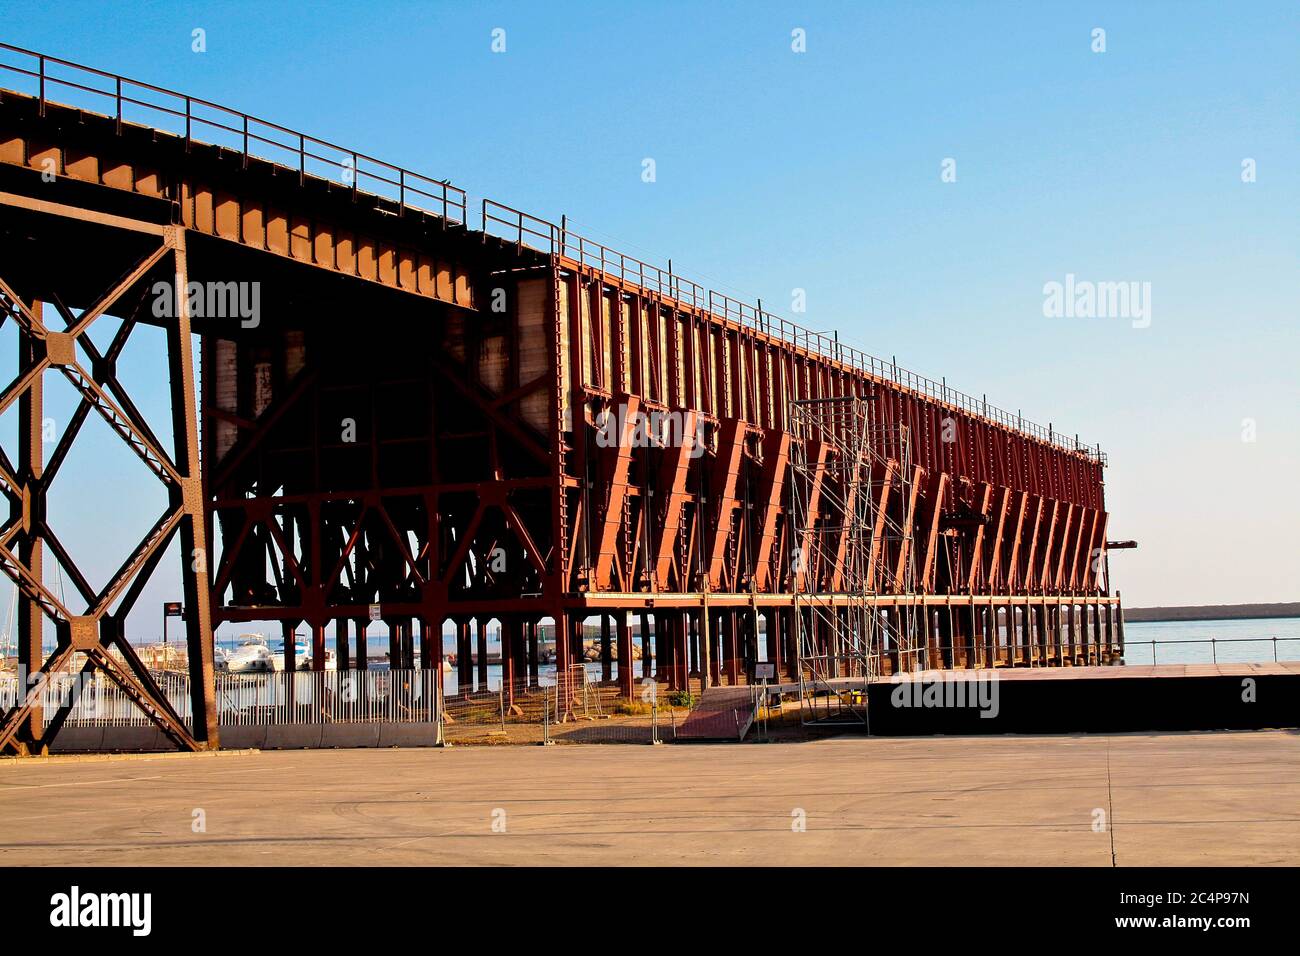 Almería, Andalusia, Spain, Europe.. The Cable Inglés (English Cable) is a  metal bridge, used to discharge minerals, from the XIX century Stock Photo  - Alamy